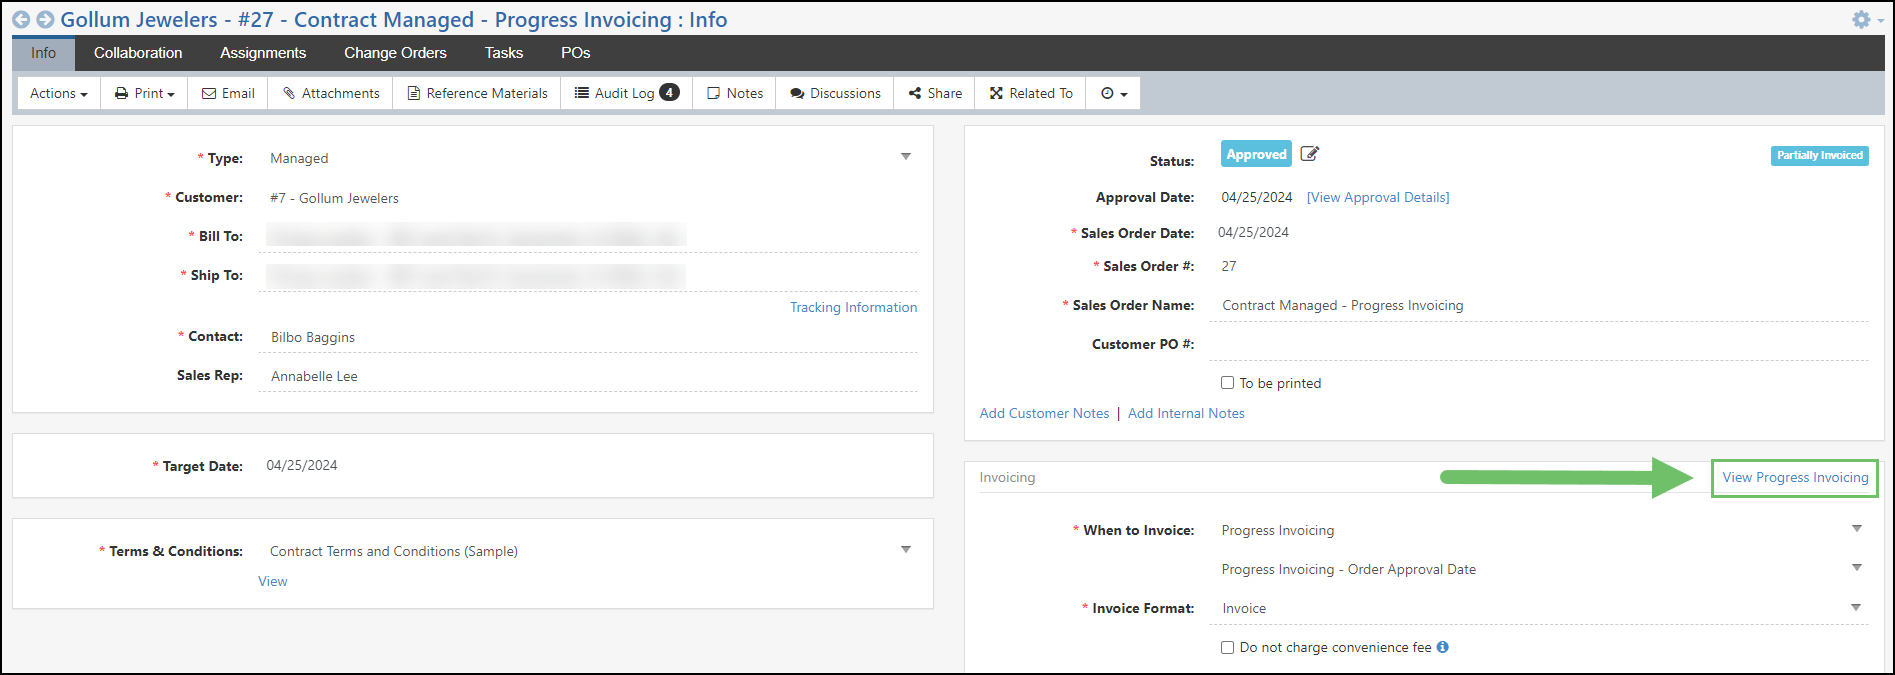 Example of viewing the Progress Invoicing Schedule on a Created Sales Order